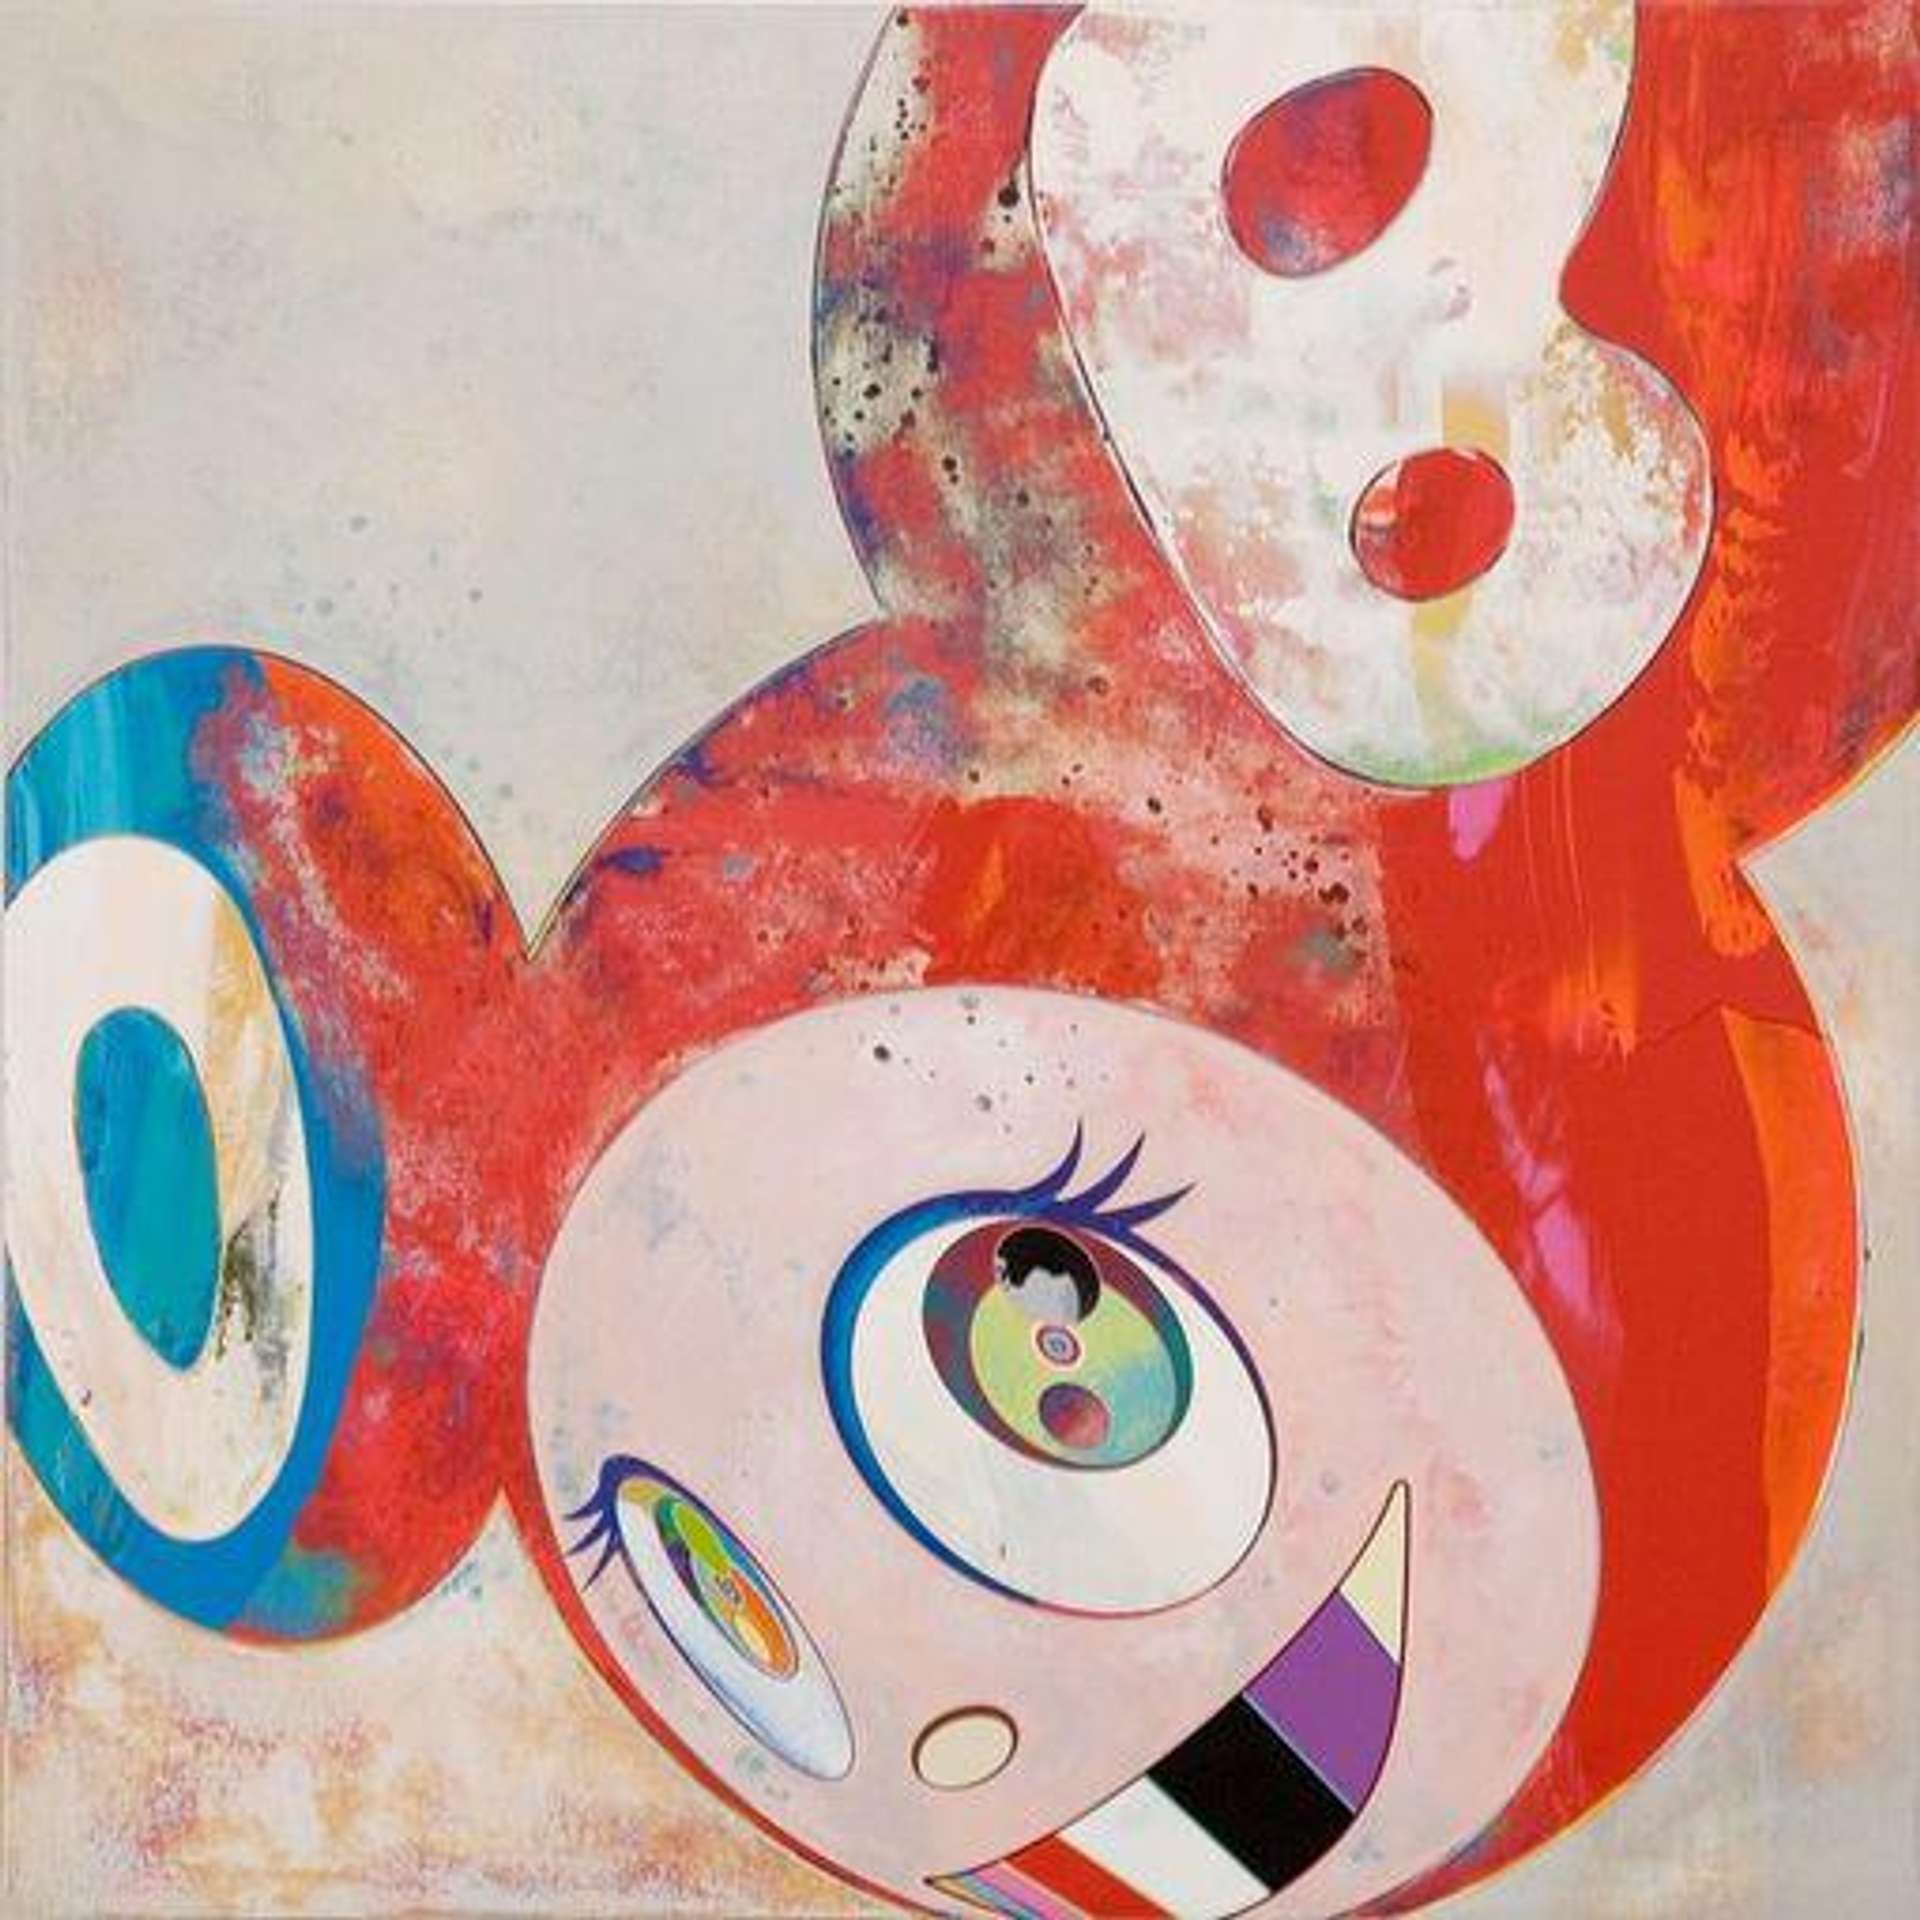 Takashi Murakami: And Then, And Then And Then Abstracktes Bild (red) - Signed Print